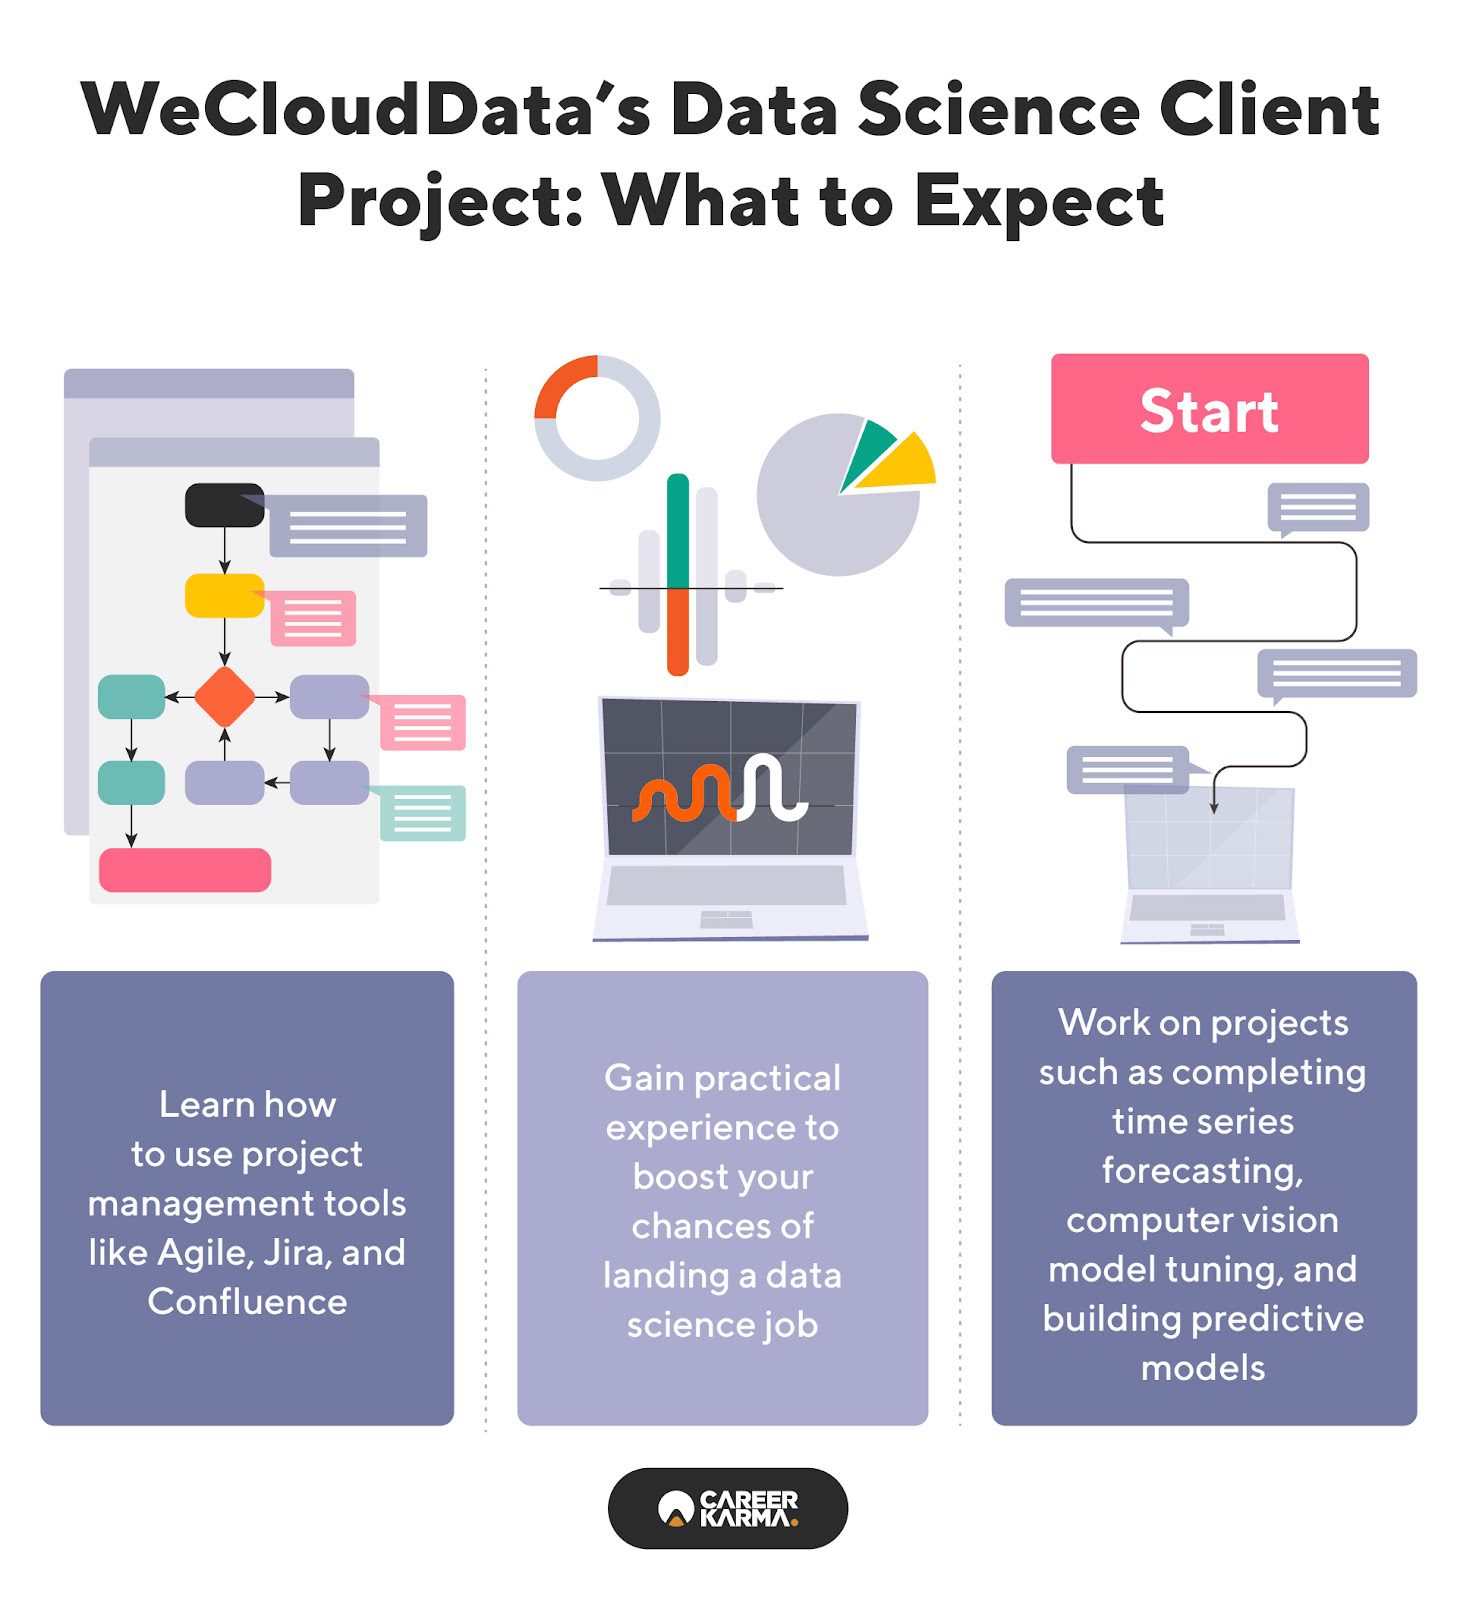 An infographic showing what you’ll expect from WeCloudData’s Data Science Client Project